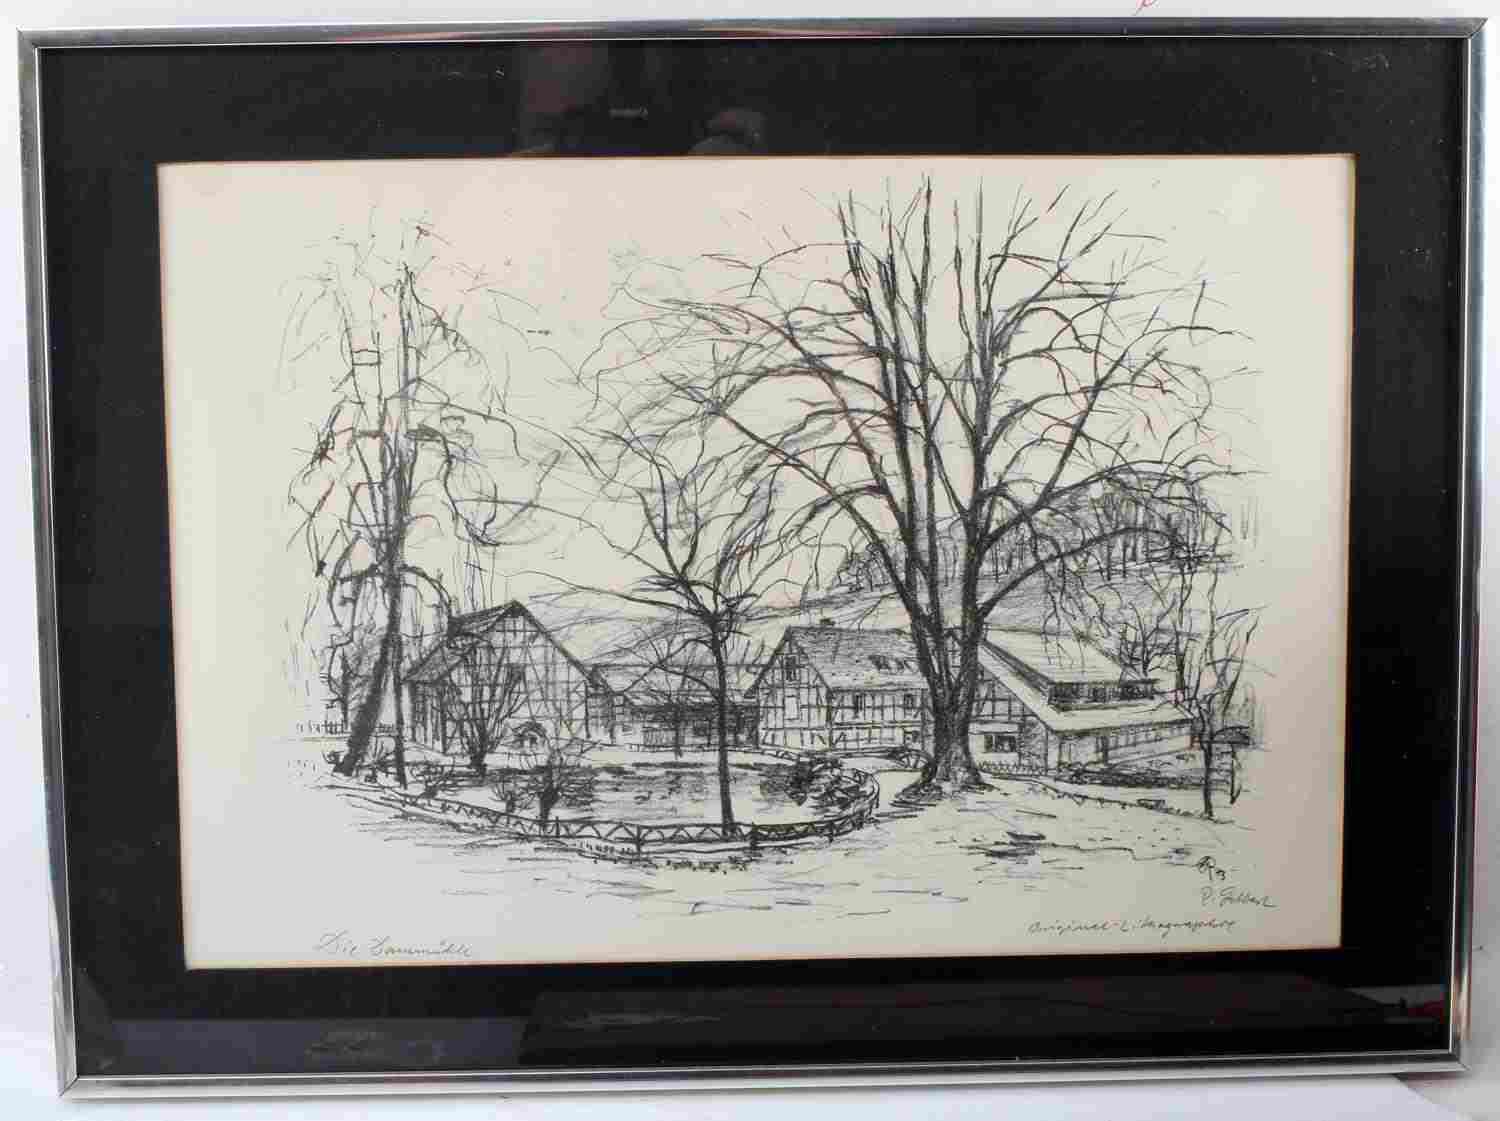 BLACK & WHITE LITHOGRAPH OF HOMES IN LANDSCAPE